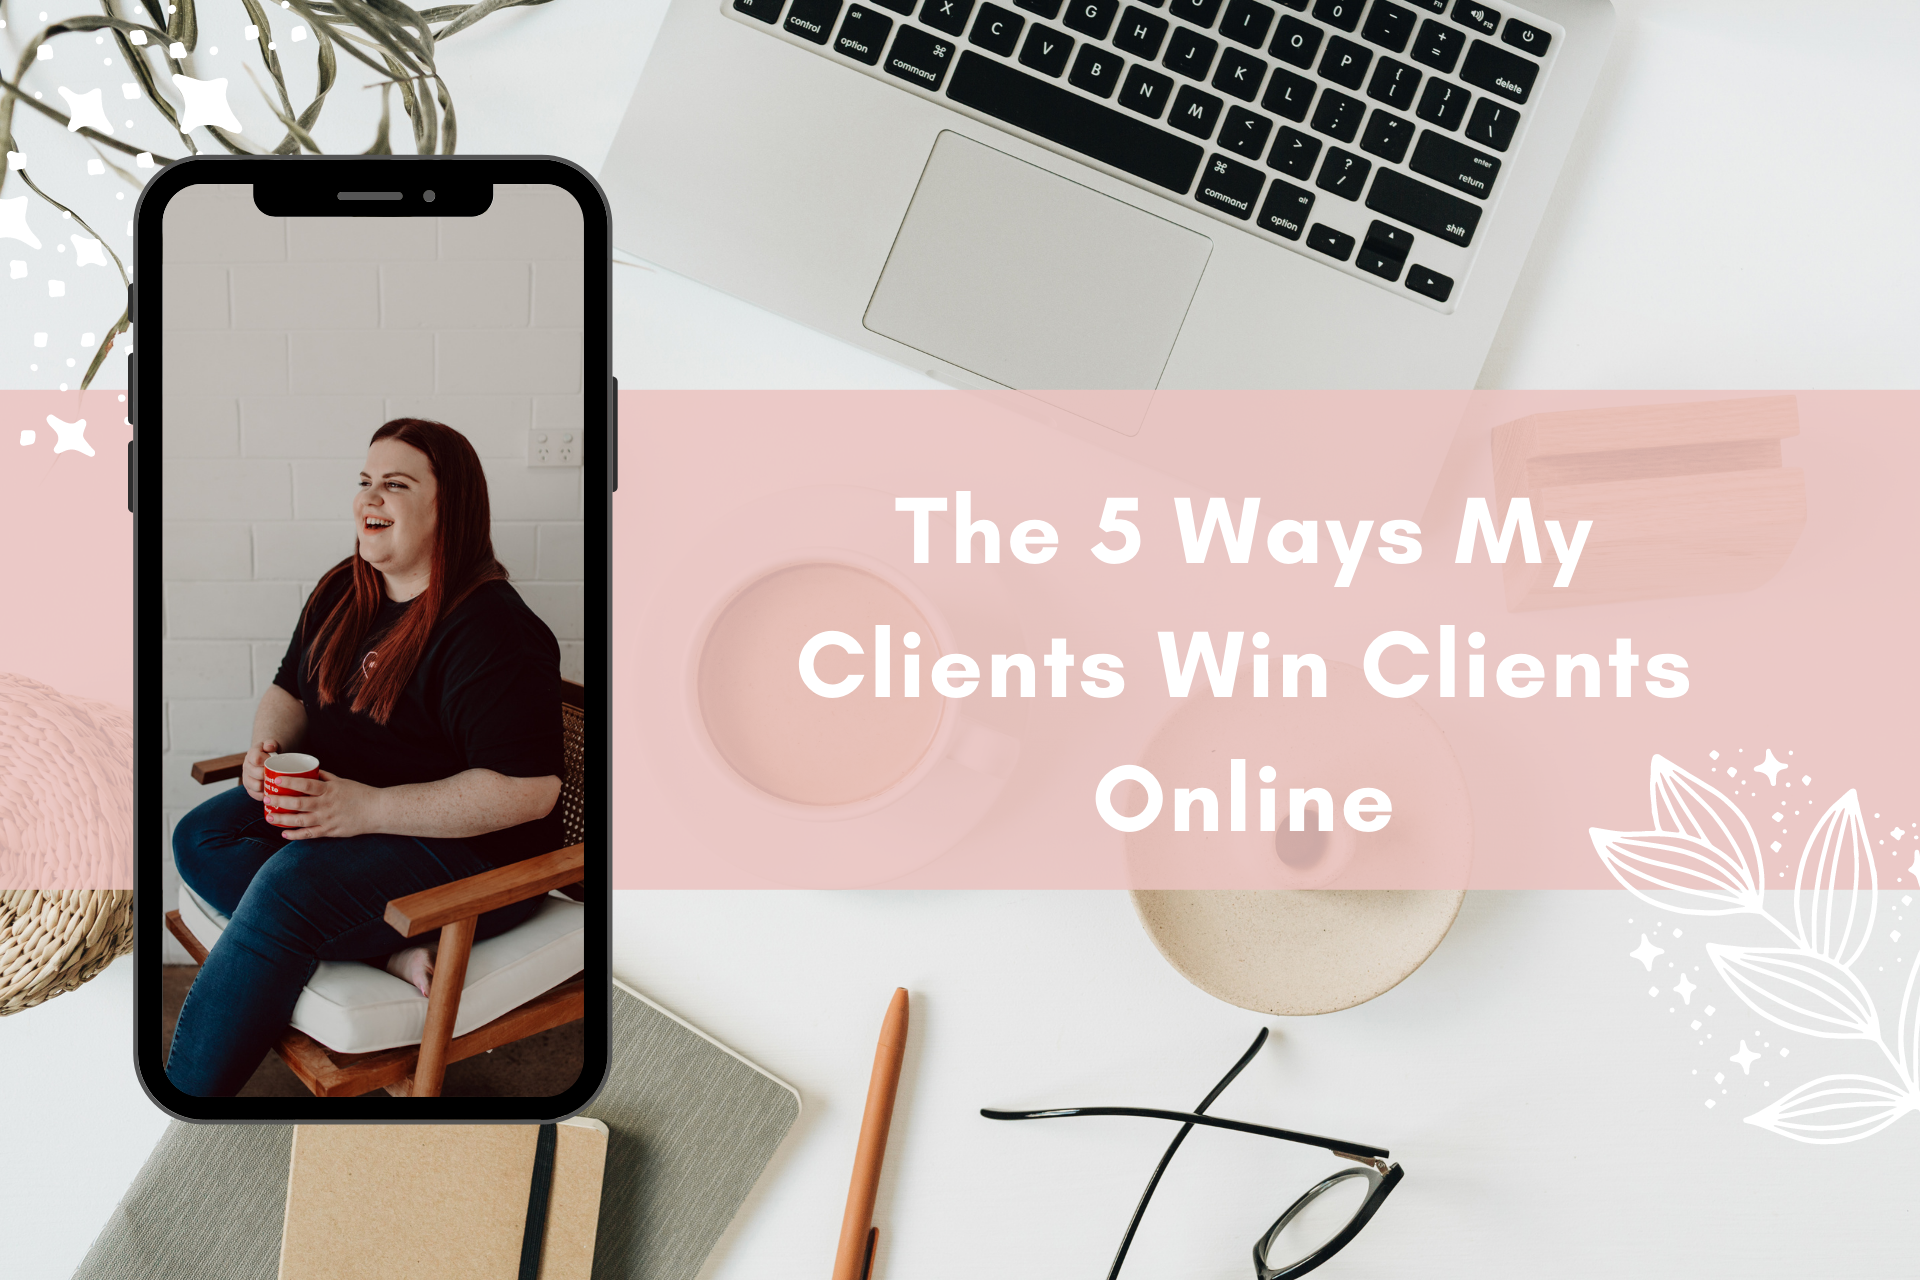 The 5 Ways My Clients Win Clients Online